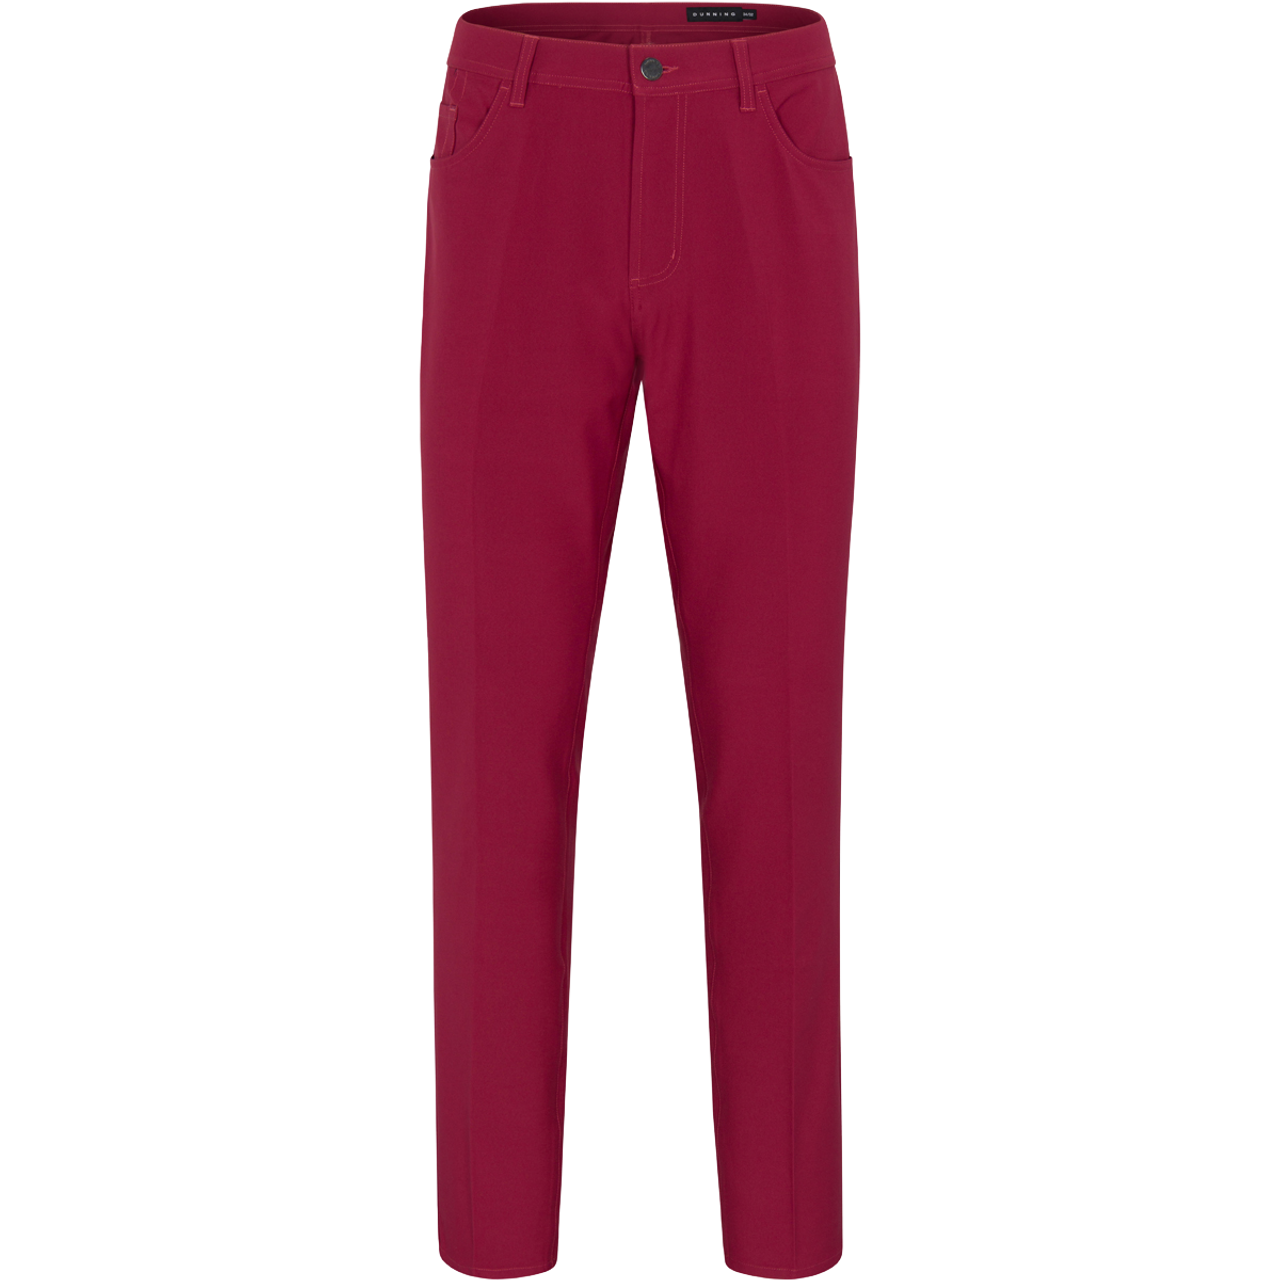 Player Fit 5-Pocket Golf Pant - Dunning